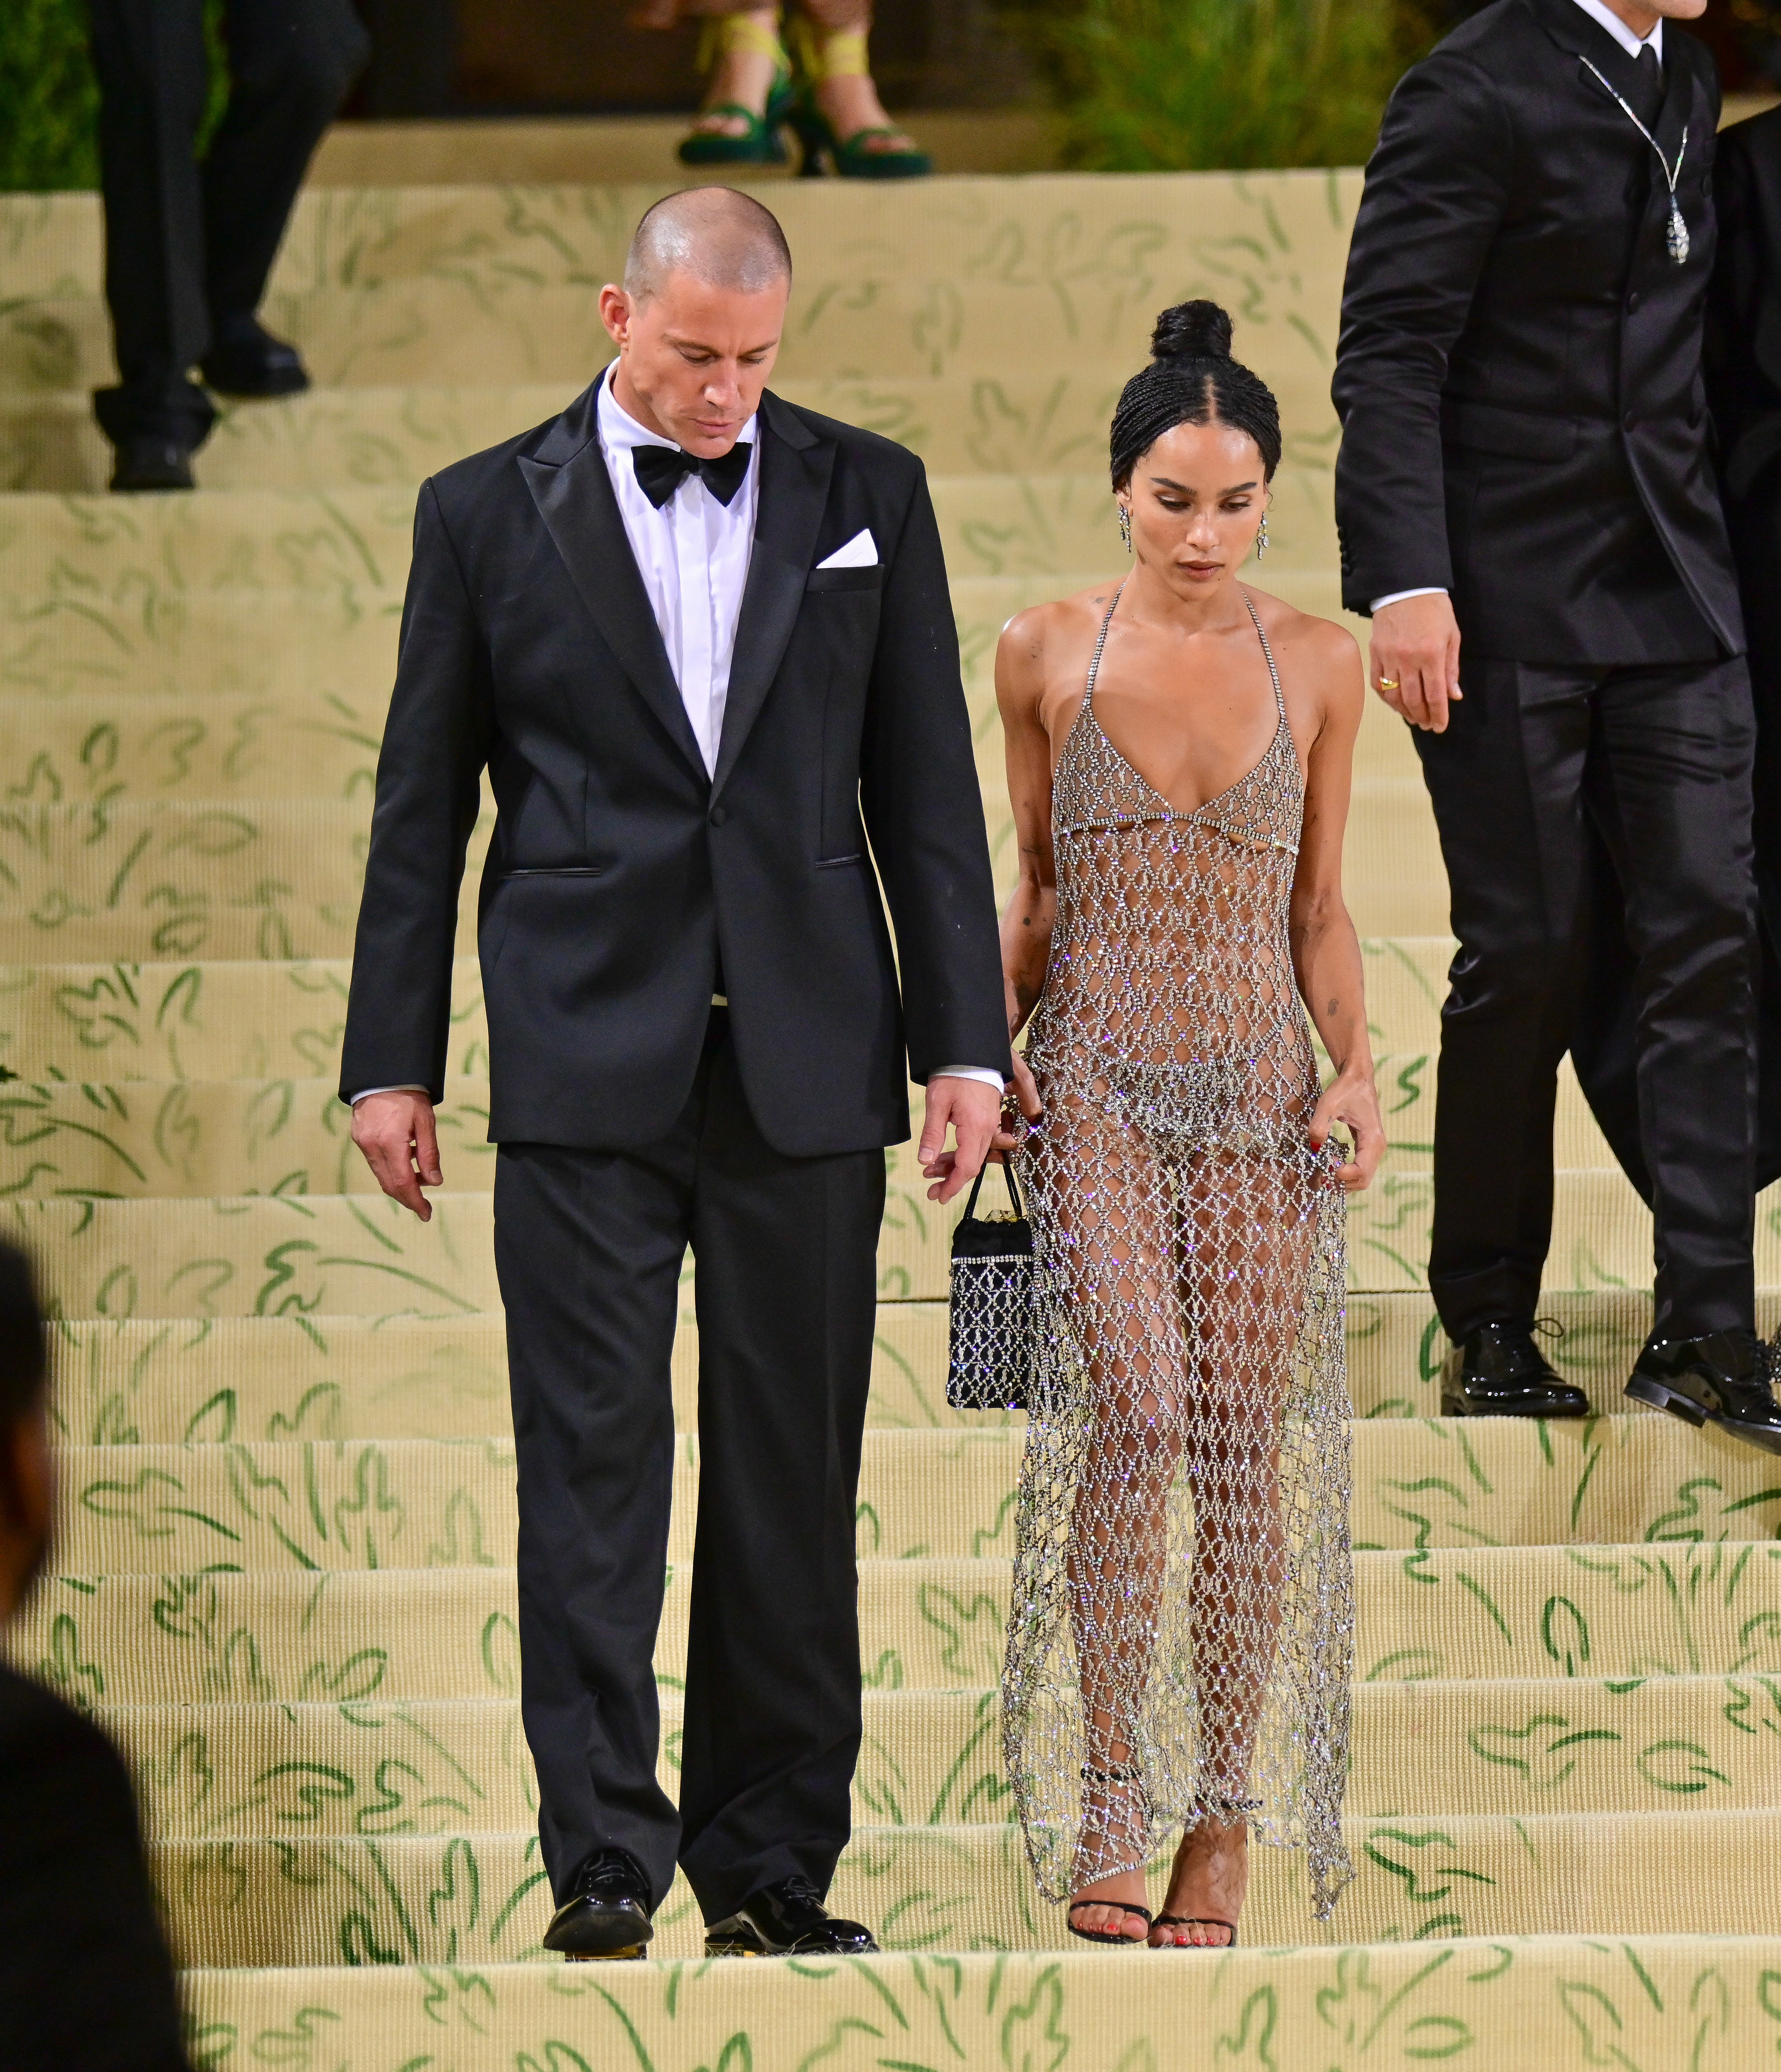 Channing Tatum and Zoë Kravitz holding hands on stairs, he in a tux and she in a see-through chain-link halter-top dress with bra panties visible underneath